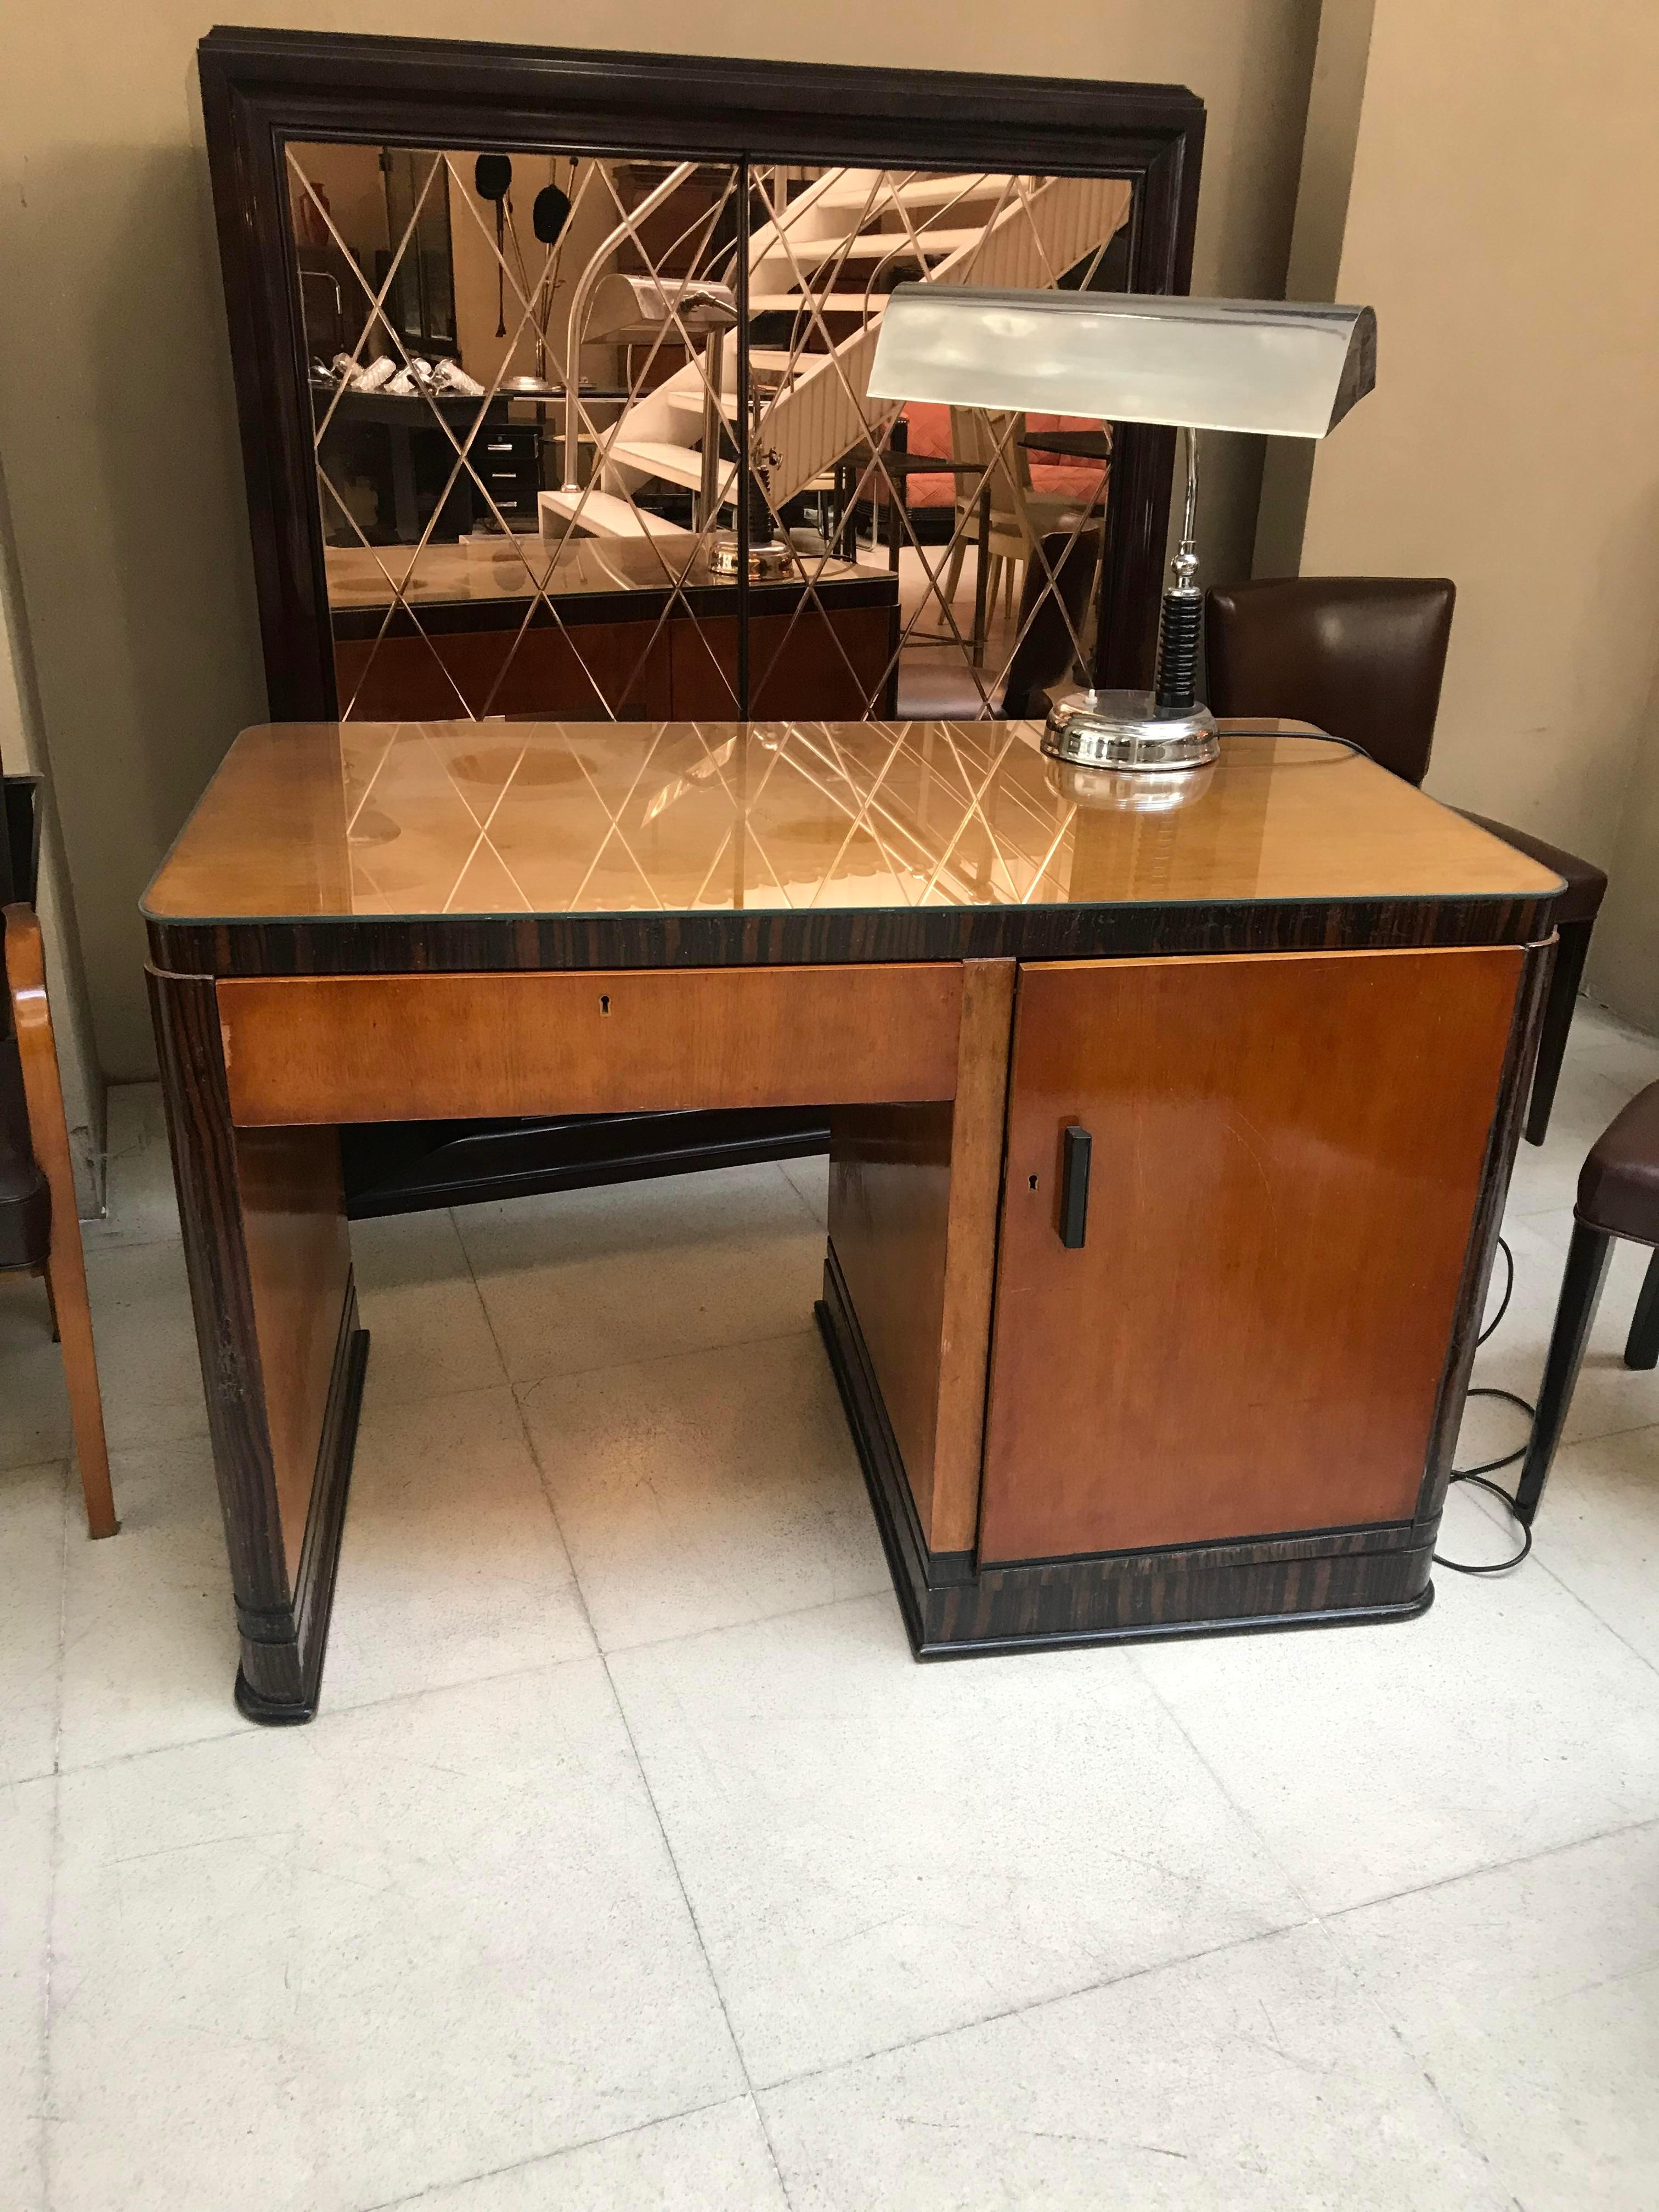 Desk Style Art Deco in wood and polyurethanic lacquer, French 1930

Desk 1930s 
Country: France
Materials: wood 
Finish: polyurethanic lacquer
It is an elegant and sophisticated desk.
You want to live in the golden years, this is the desk that your